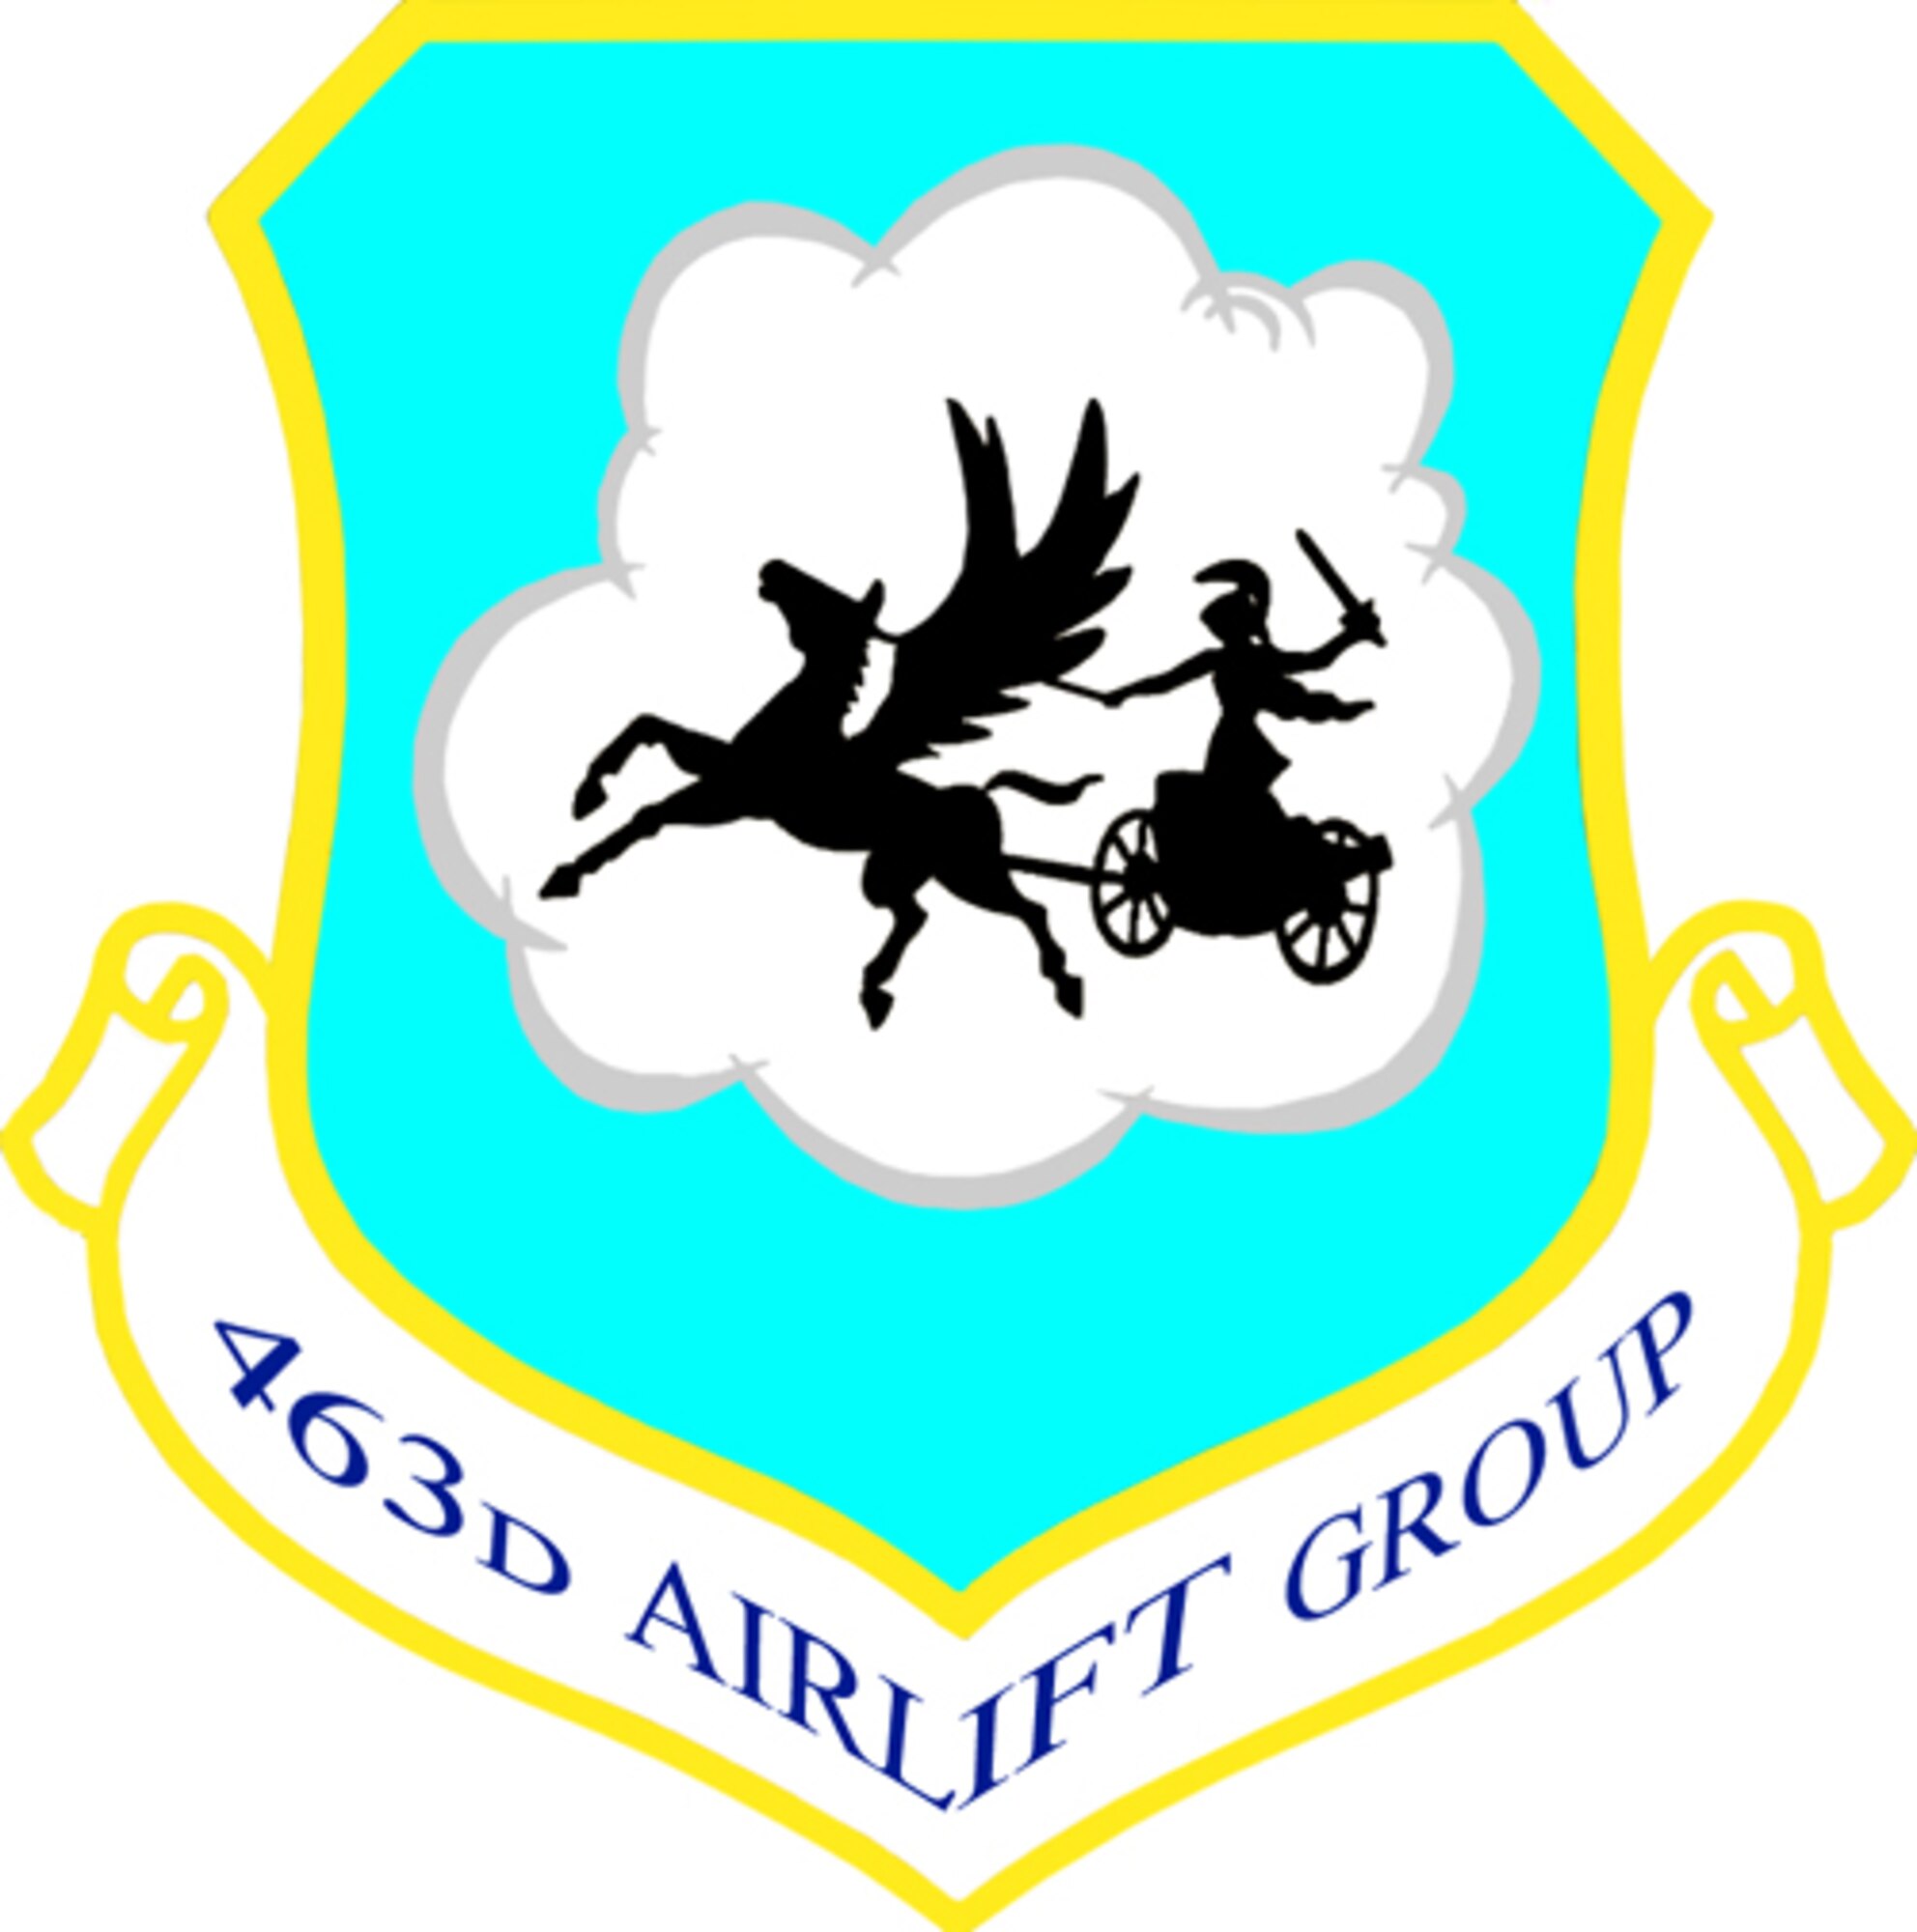 April 1, 1997, the 463d Airlift Group activated at Little Rock Air Force Base. The group first activated in 1953 as a troop carrier wing at Memphis Municipal Airport, Tennessee, operating the C-46 and C-119.  Three years later when the Air Force accepted the first production of C-130As from Lockheed, crews assigned to the 463rd TCW were the first to operate the slick new aircraft. With the unit's activation at Little Rock AFB, 463rd AG crews returned to the C-130 with the assignment of the 50th Airlift Squadron and 61st Airlift Squadron. Previous to the reassignment, the squadrons had served as the operational flying units of the 314th Airlift Wing. The 314th AW retained its flying training mission with the 53rd AS and 62nd AS.